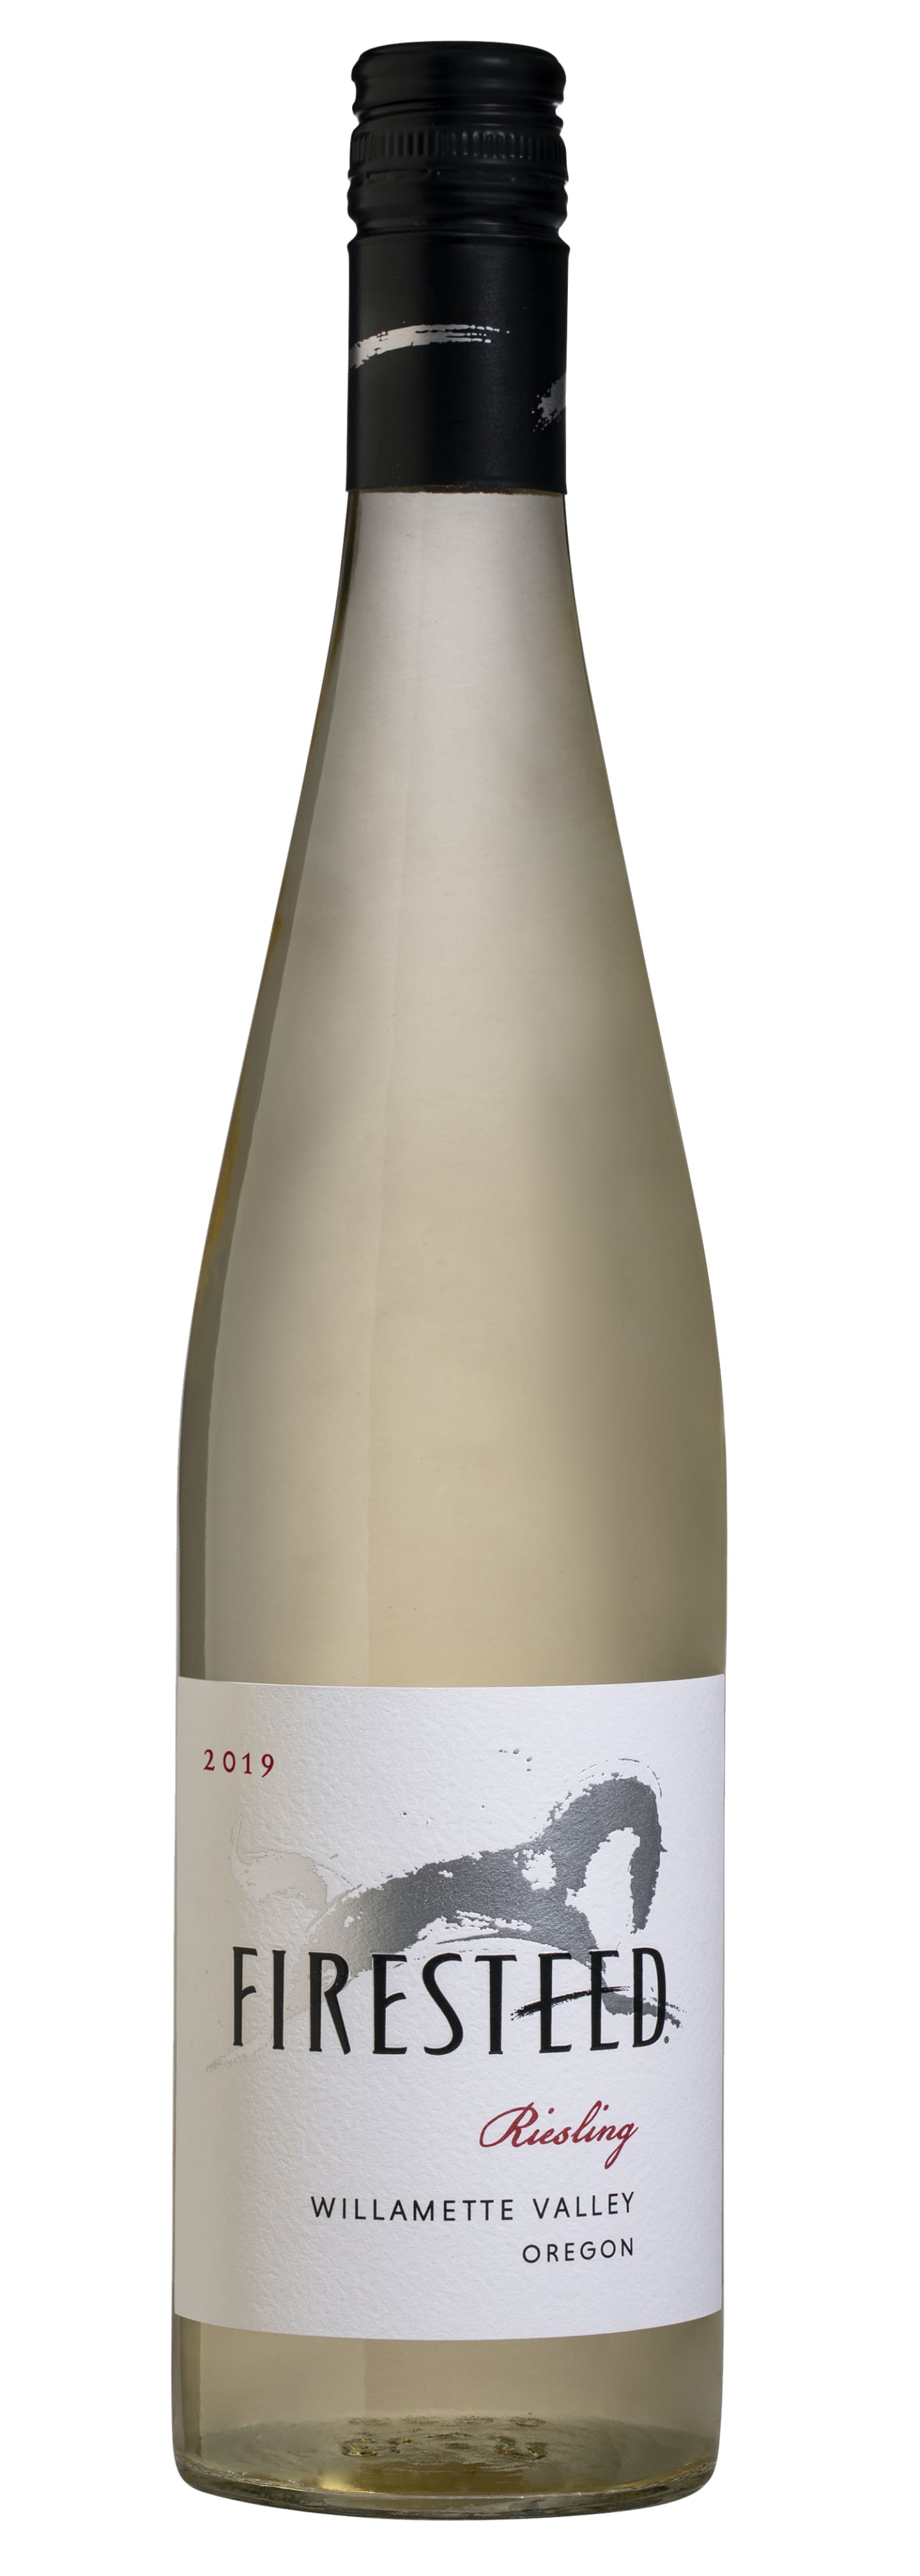 Firesteed Riesling 2019